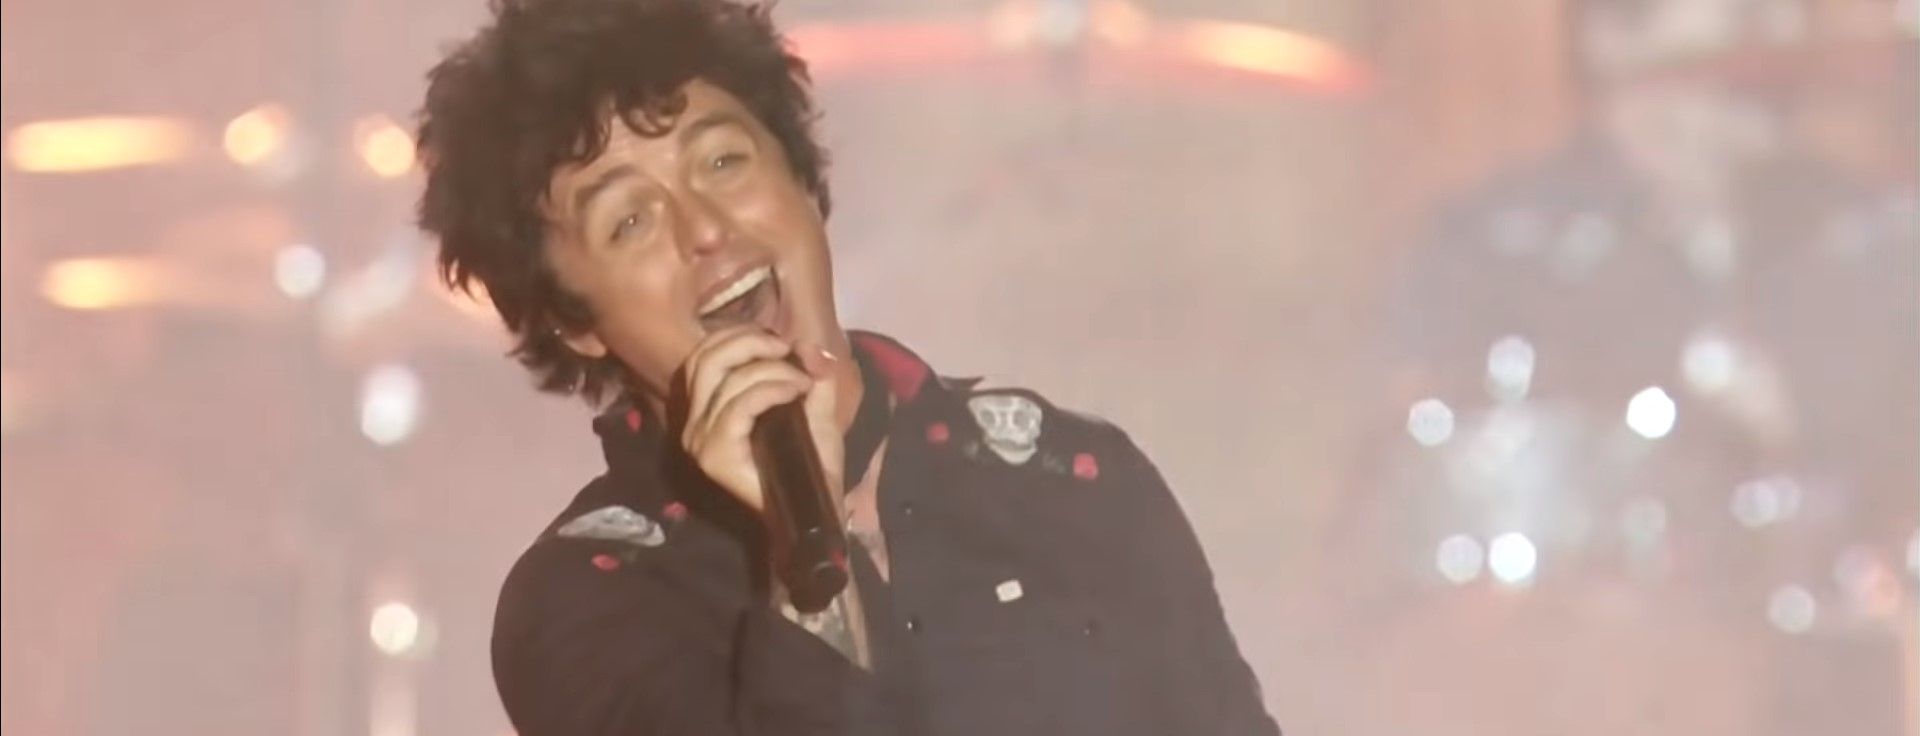 Green Day - Father of All / Basket Case (Live at MTV EMA 2019)